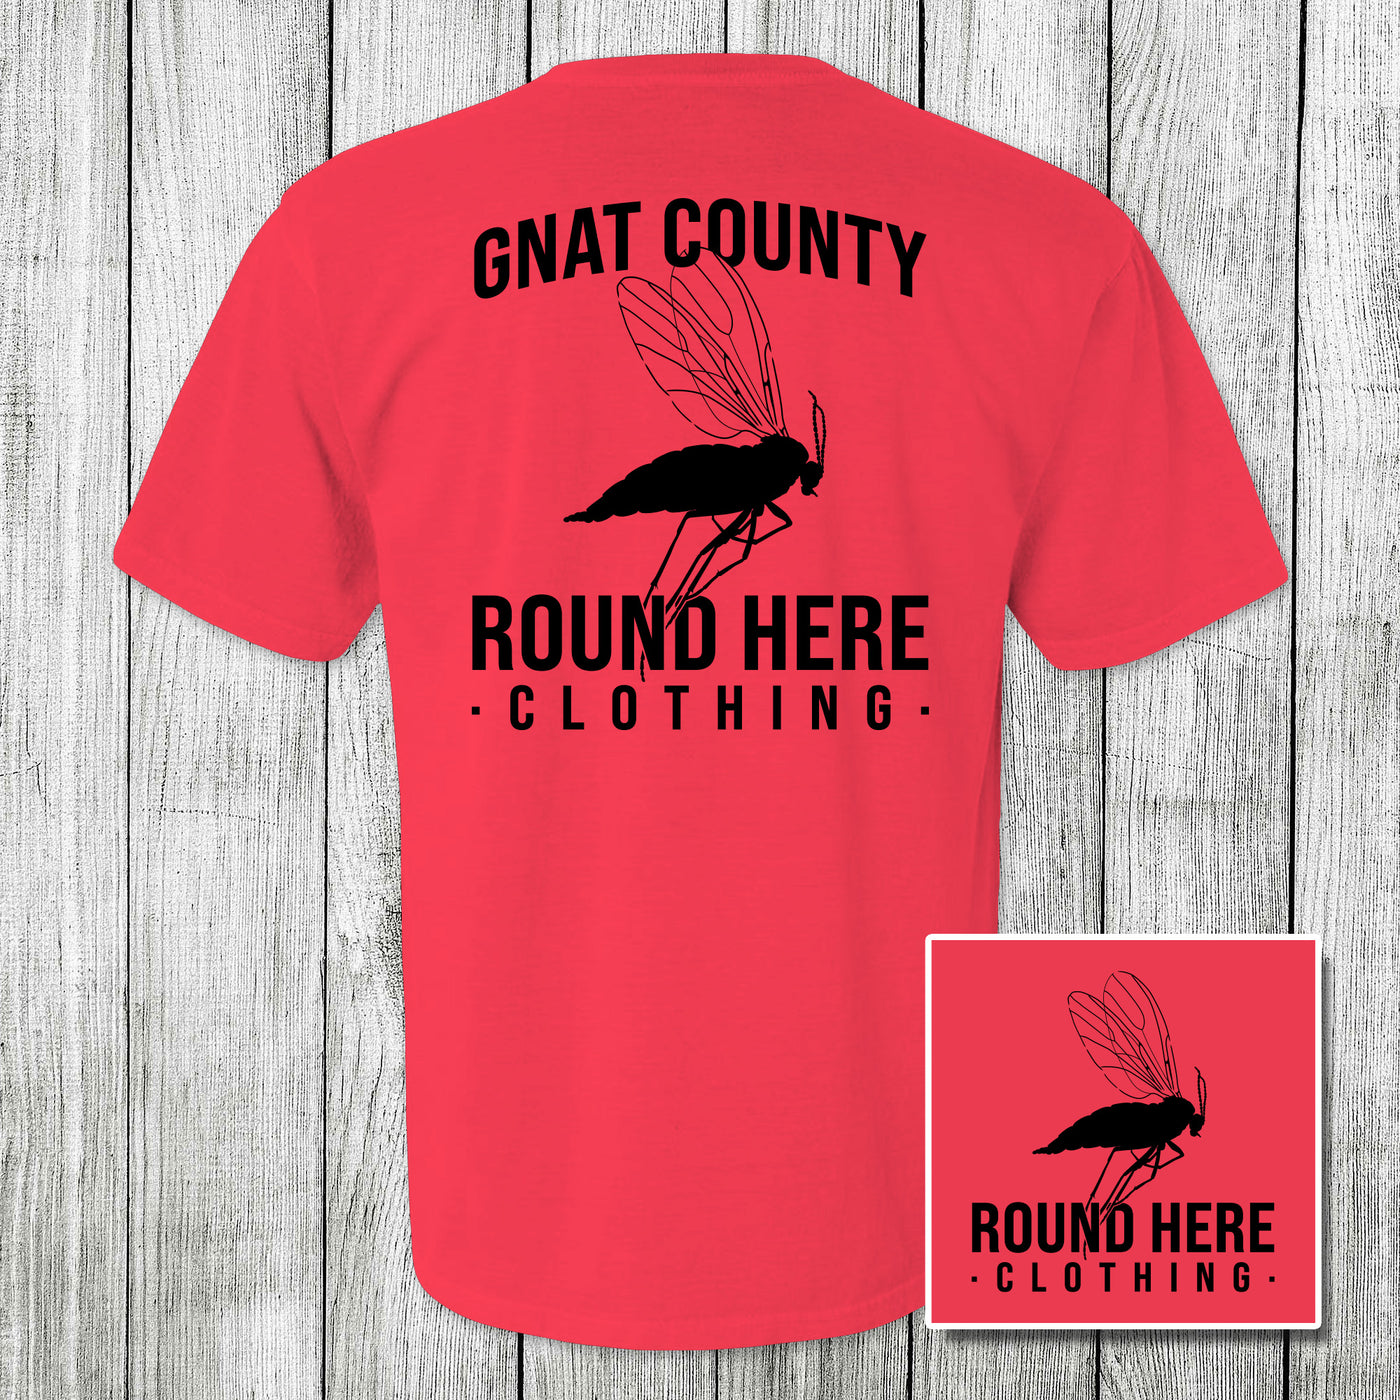 'Round Here Clothing Gnat County